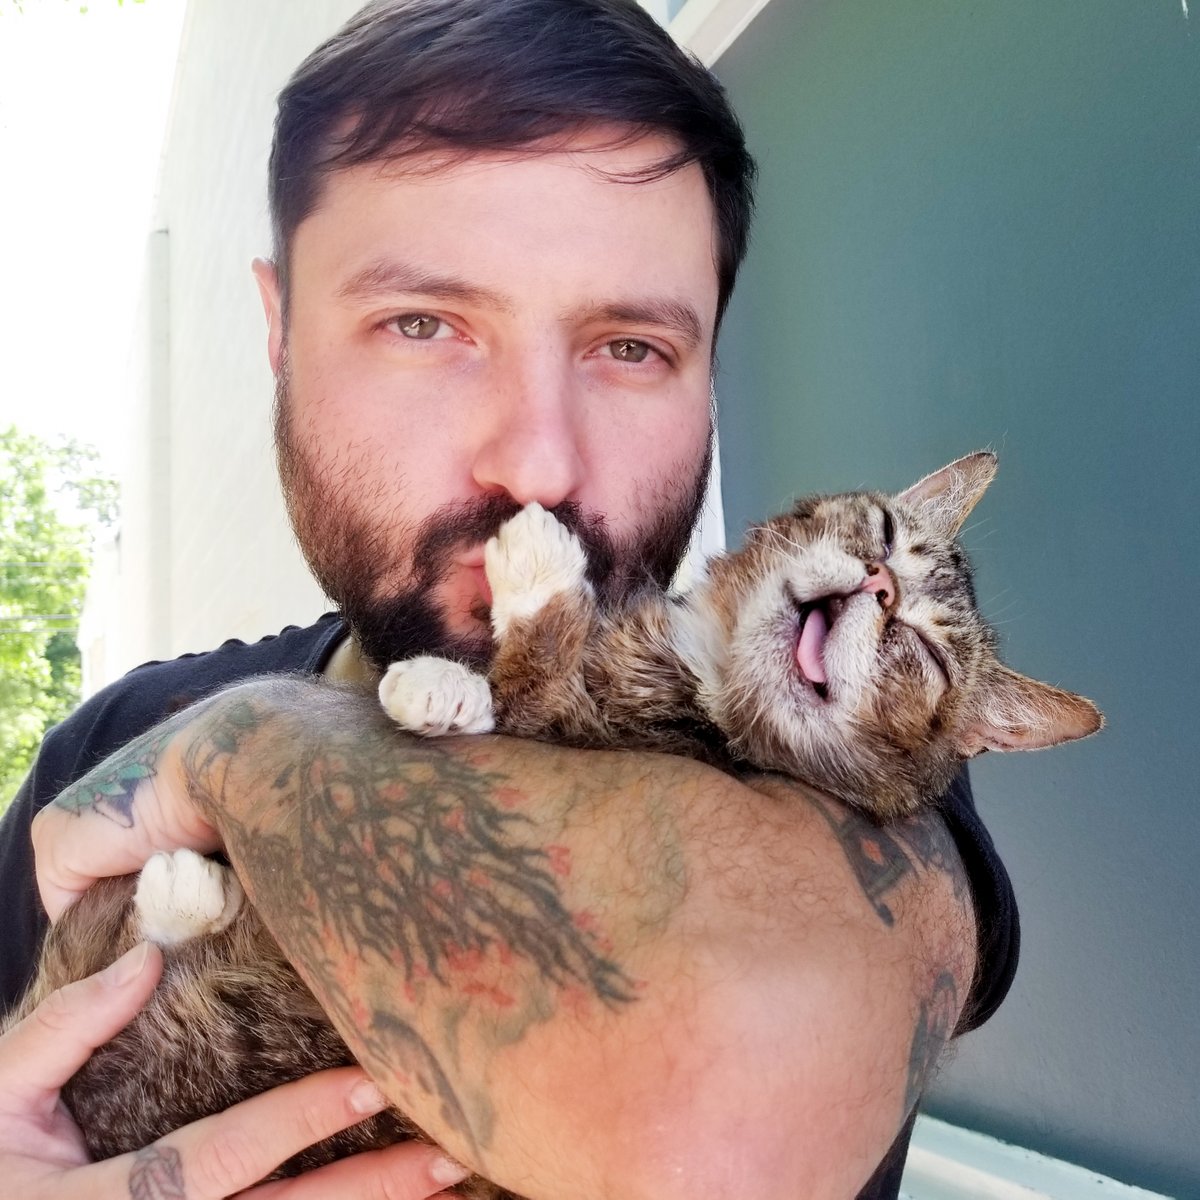 BUB's laughing in this photo because she had just used the litter box. hahaha very funny, BUB